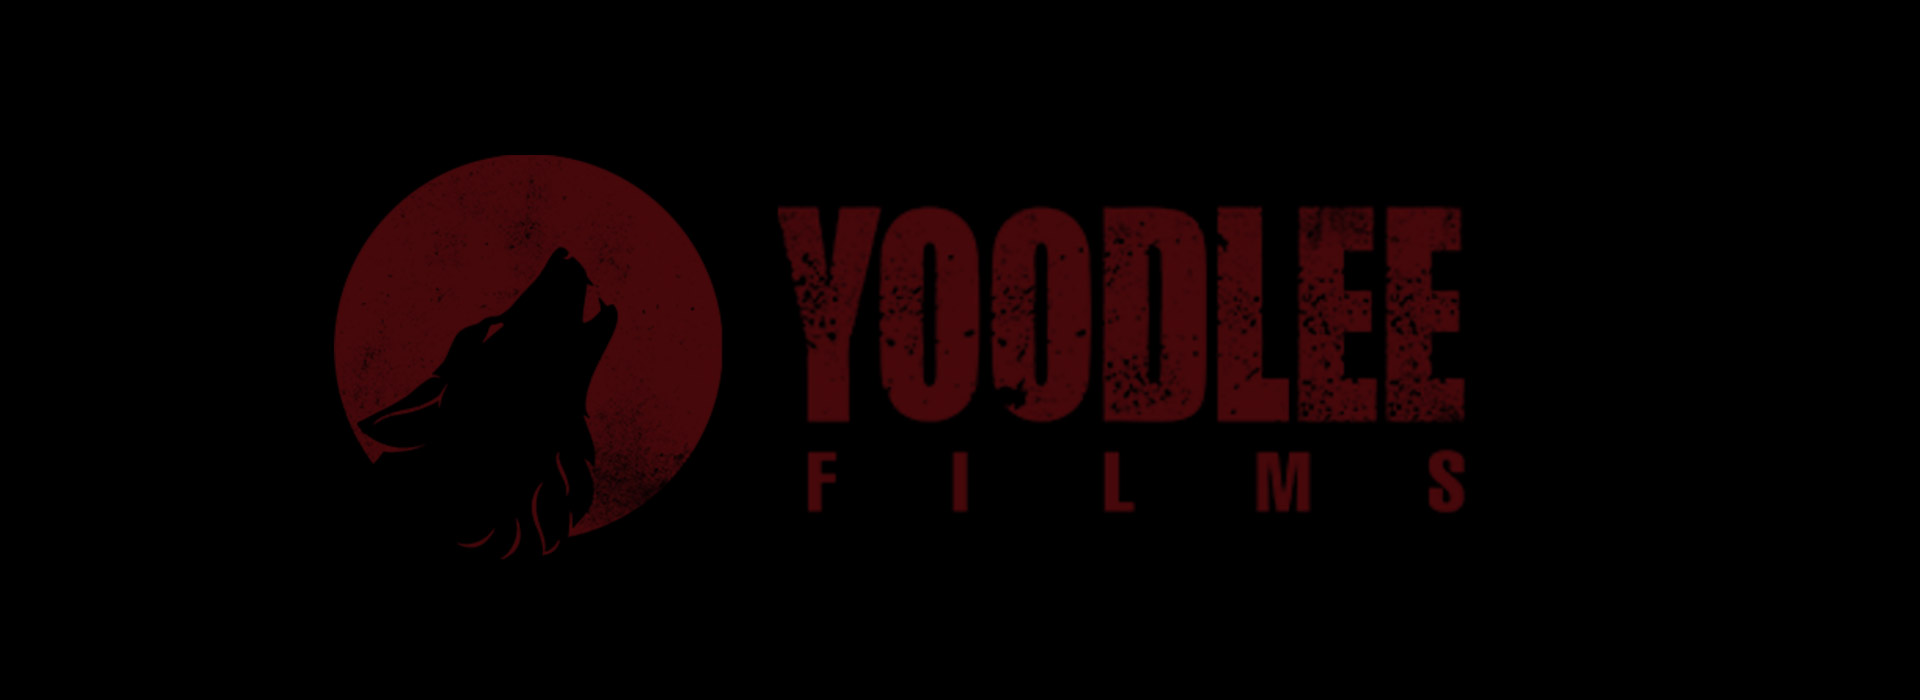 Saregama’s film division, Yoodlee Films, was launched providing offbeat content for the discerning Indian viewer.